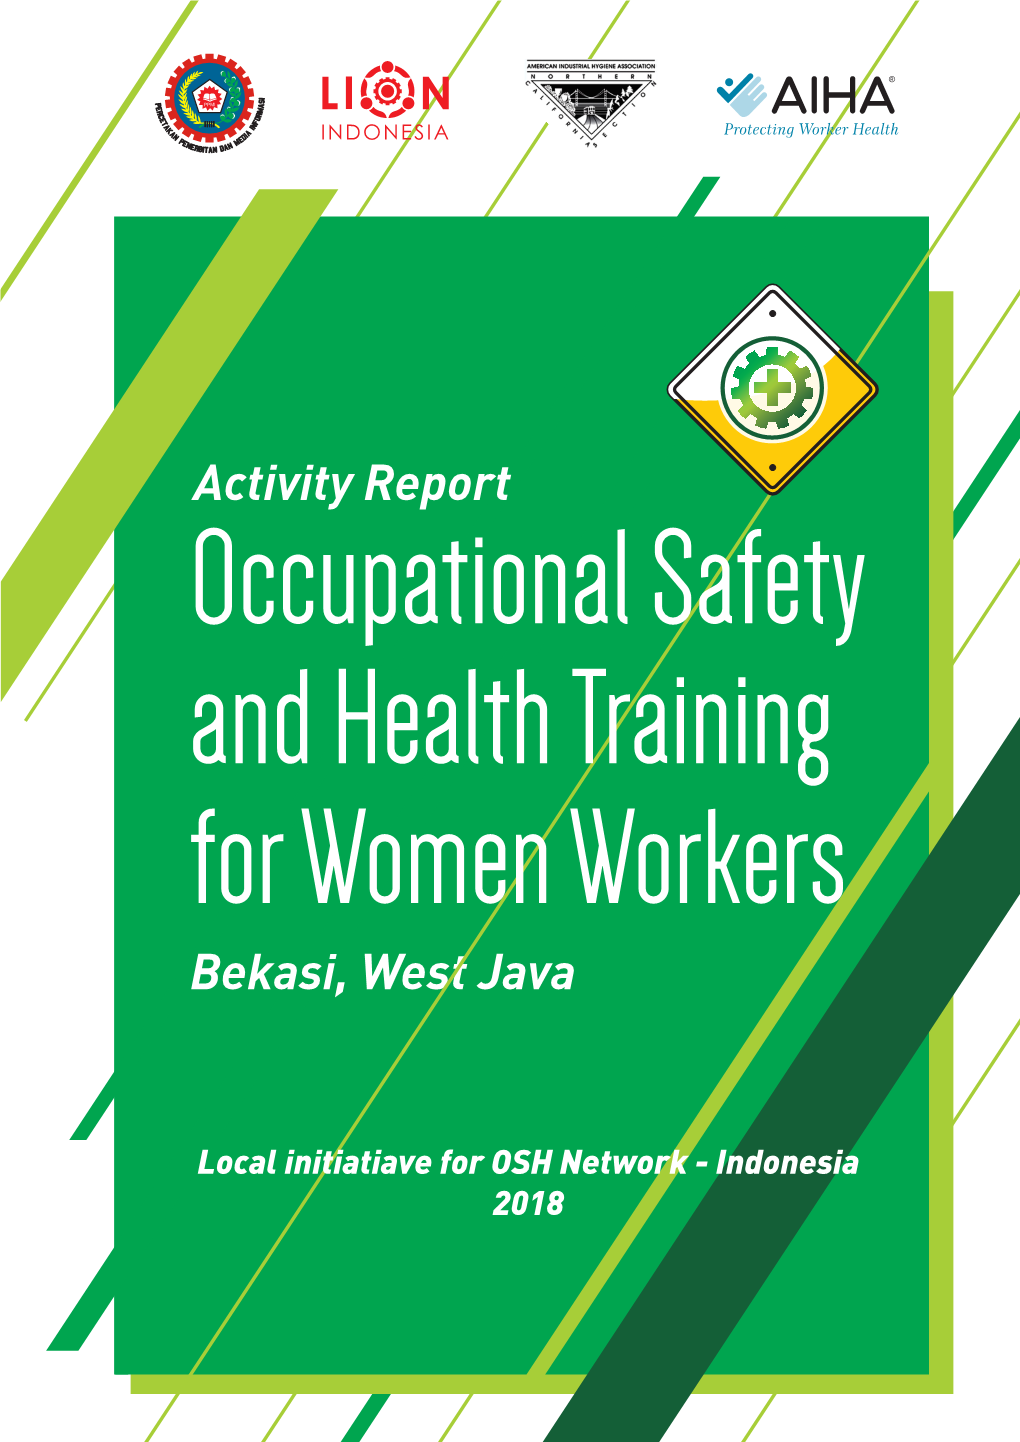 OSH Training for Women Workers